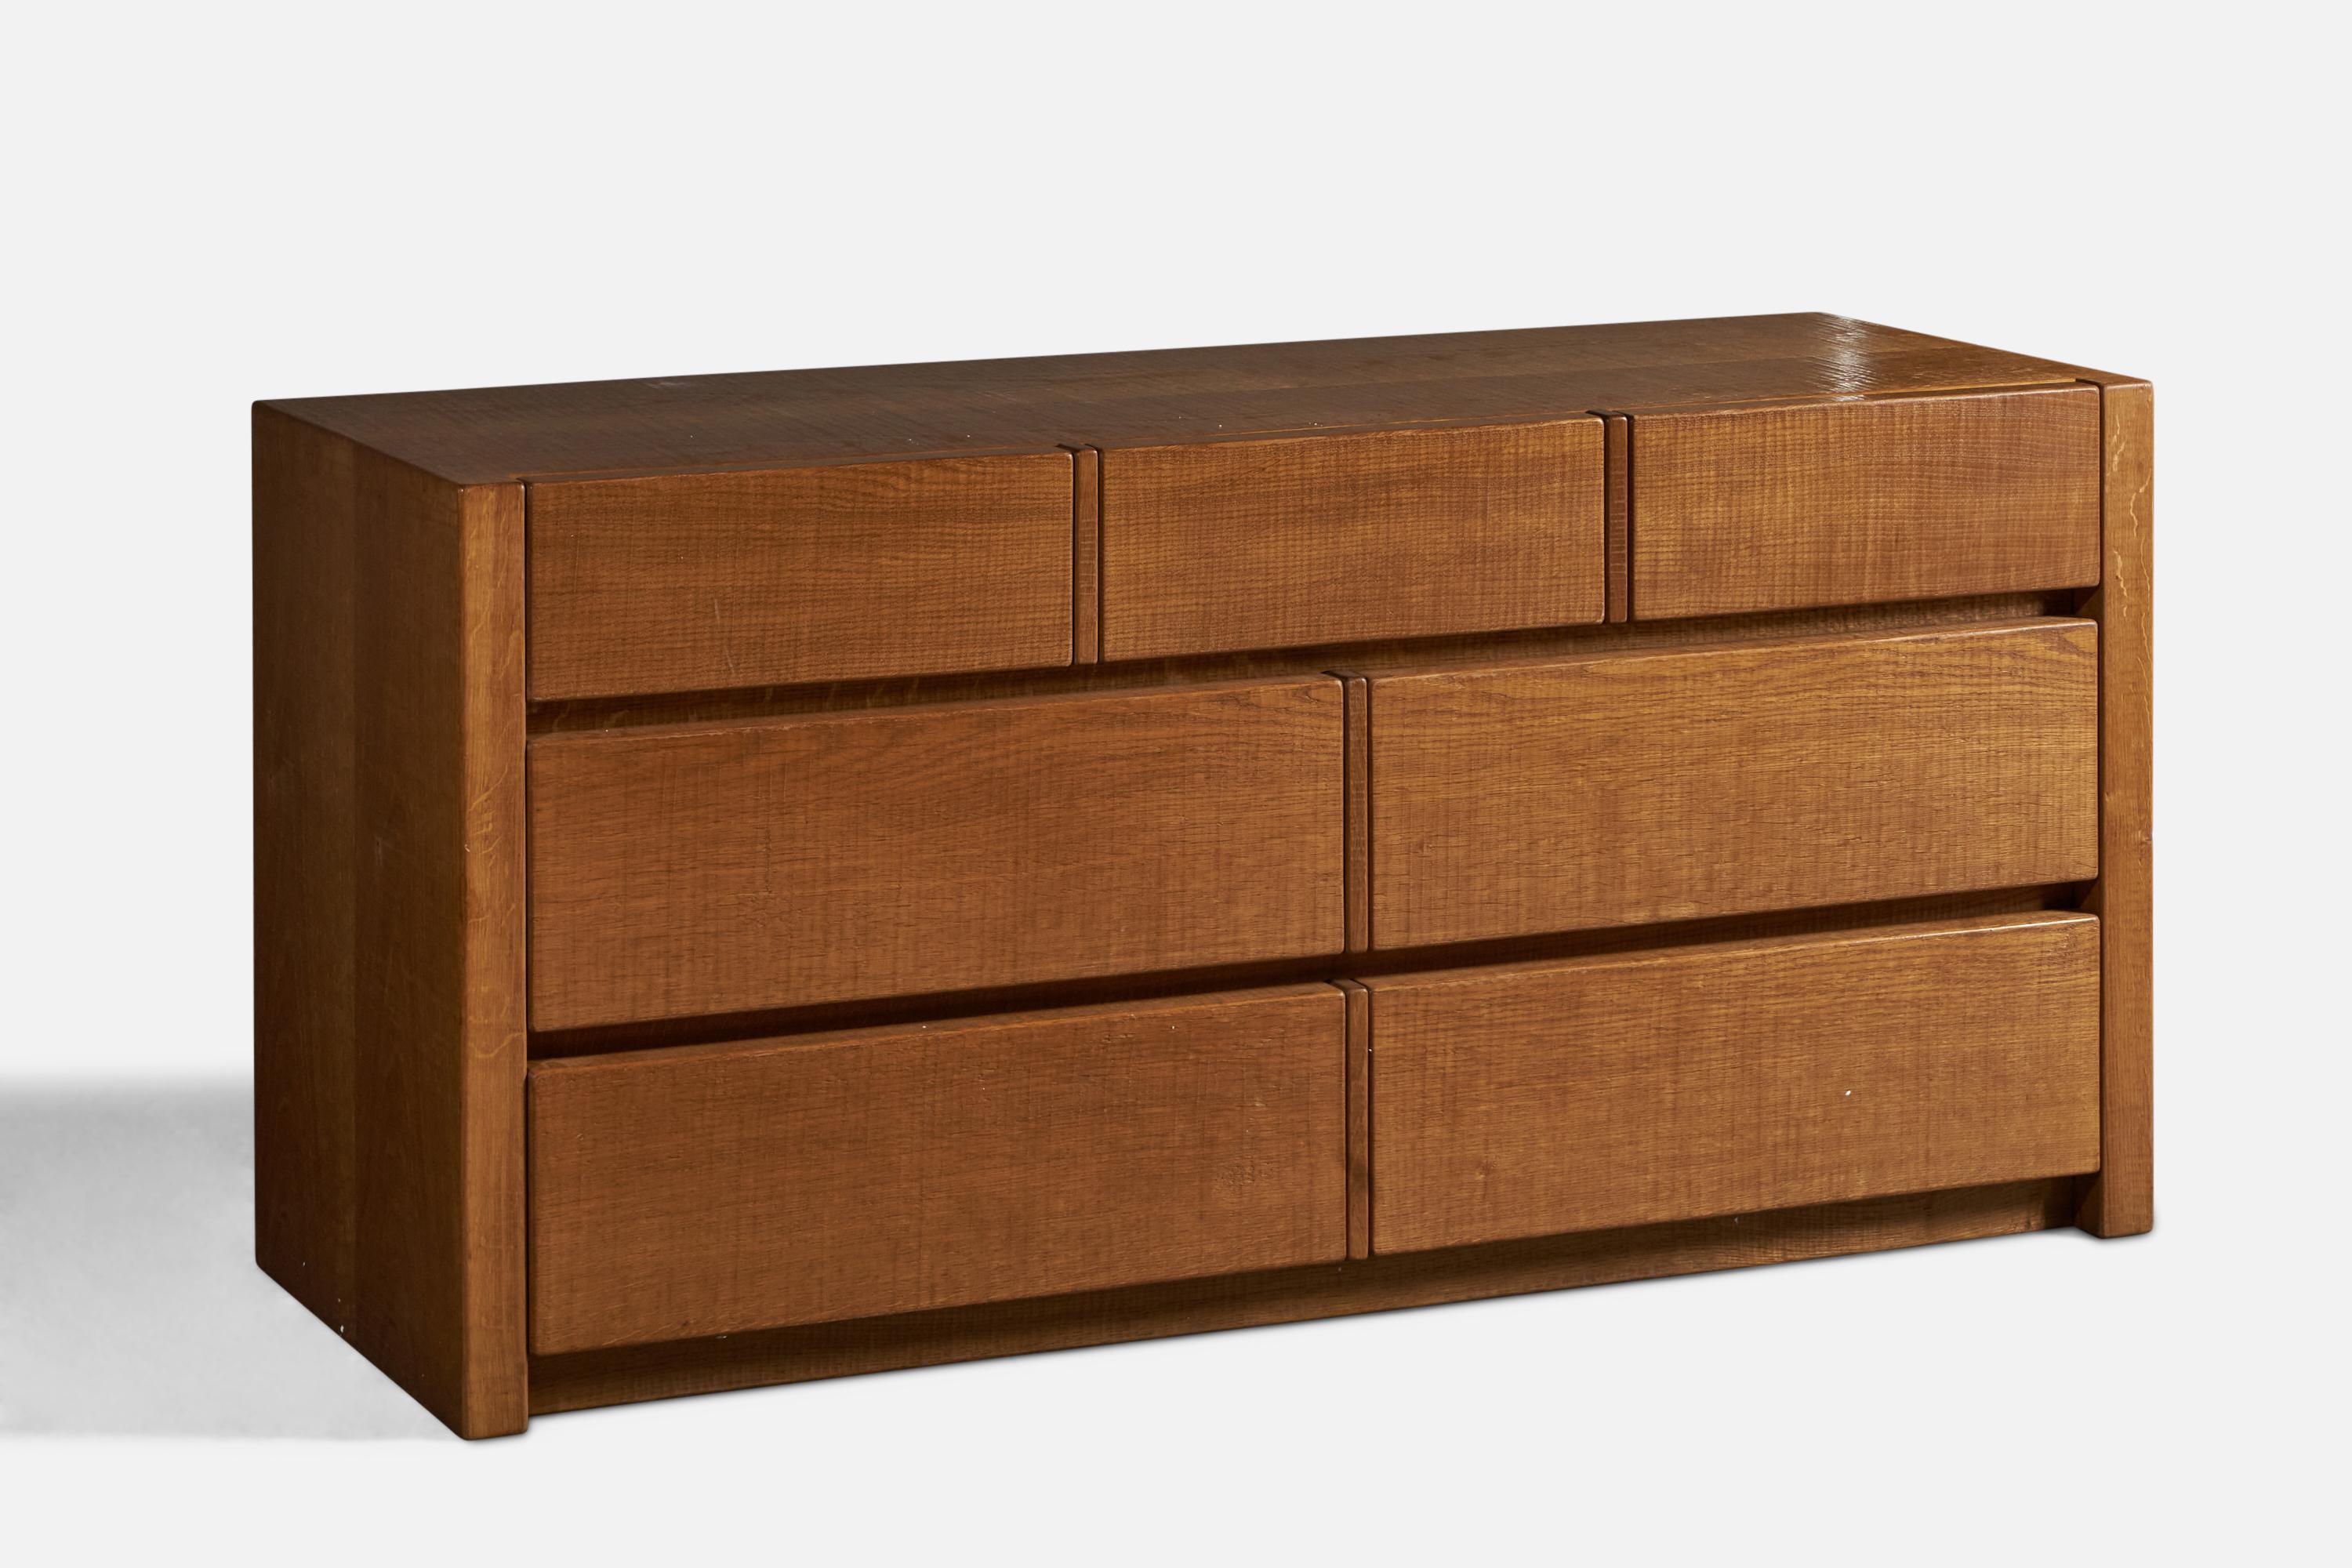 A solid oak chest of drawers or dresser, designed by Guiseppe Rivadossi and produced by Officina Rivadossi, Italy, c. 1980s.